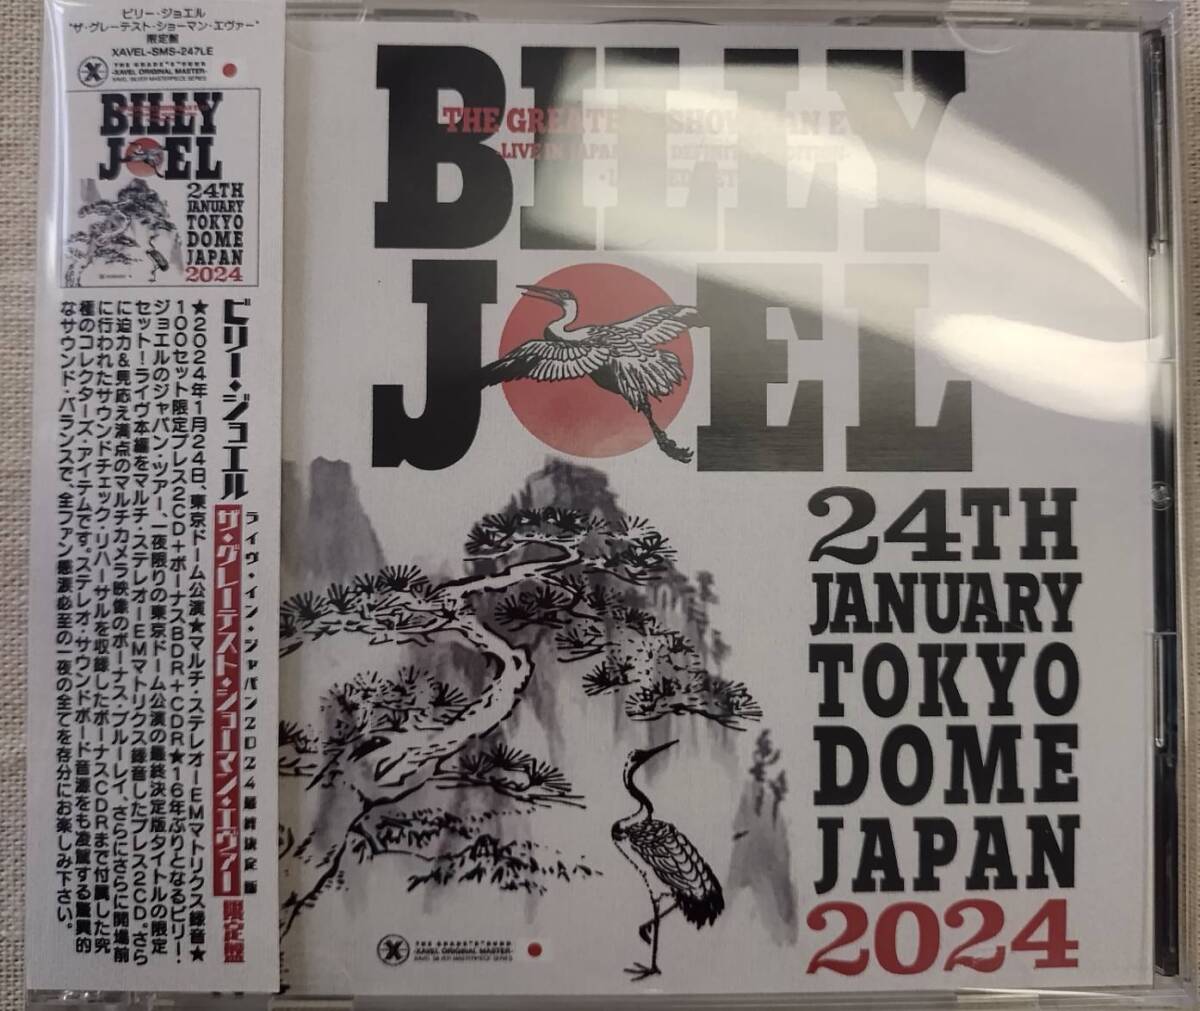 Billy Joel / The Greatest Showman Ever 限定セット XAVELレーベル Live in Japan 2024  Definitive Edition Limited Setの入札履歴 - すべての入札履歴